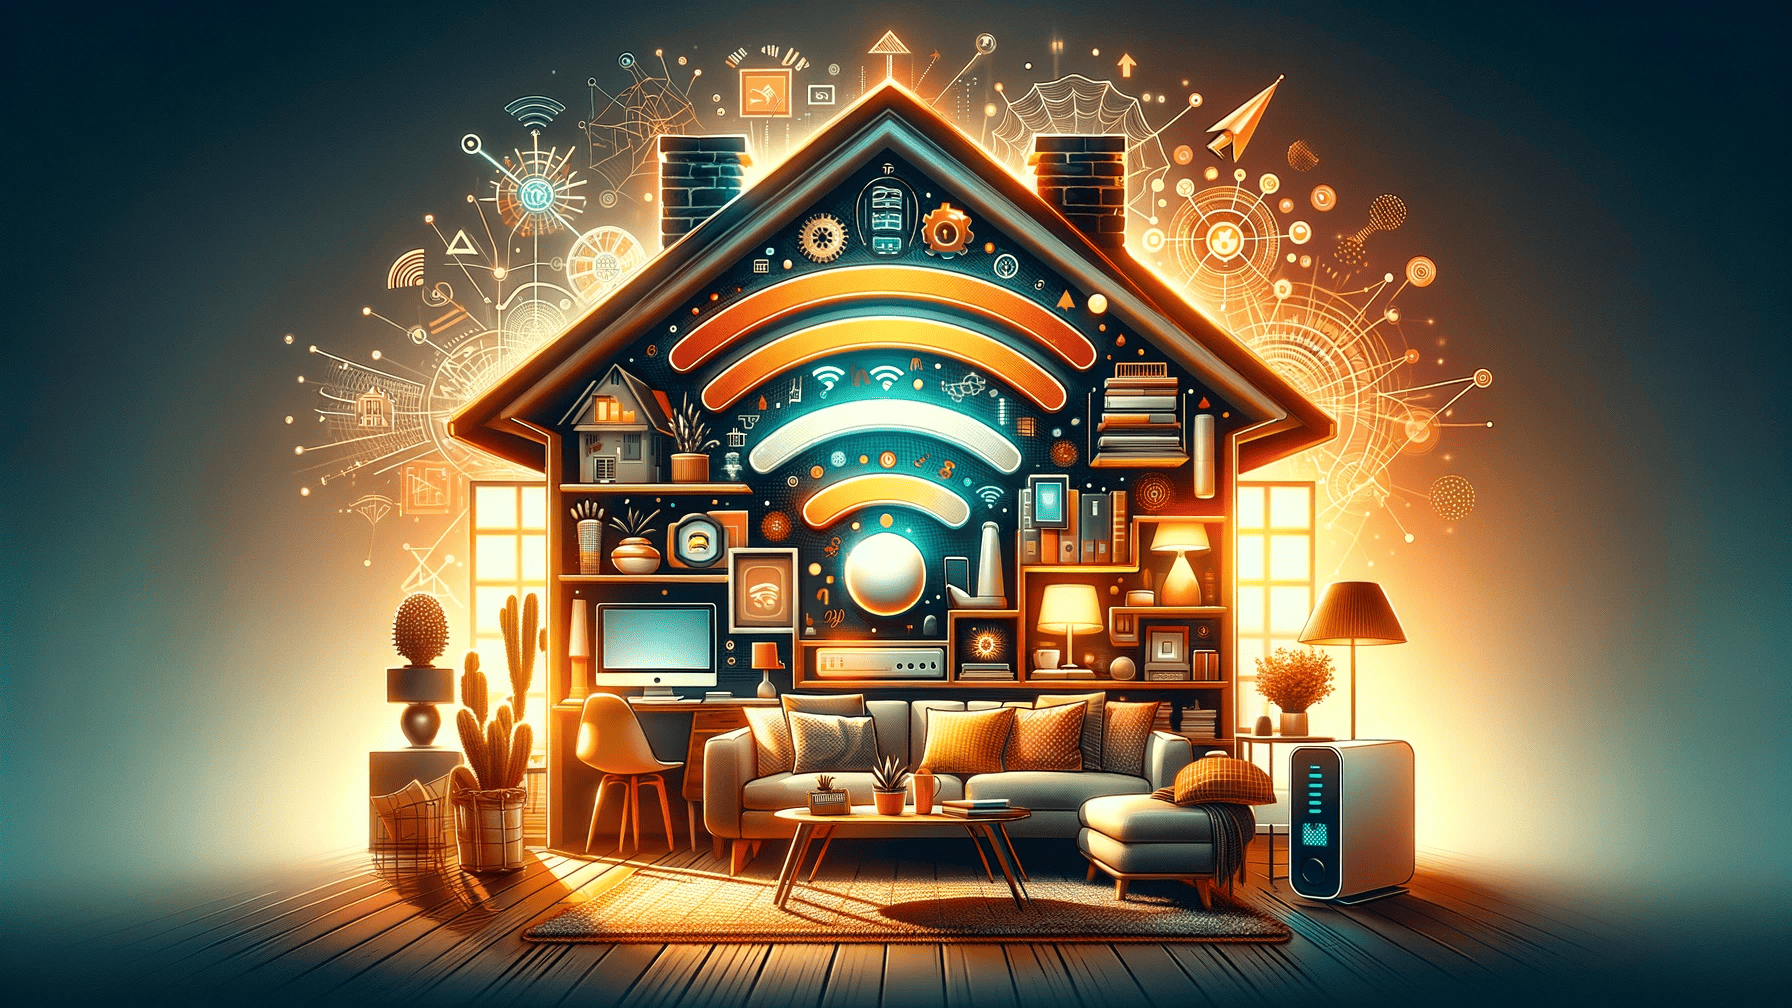 Stylistic image of a home covered in Wi-Fi